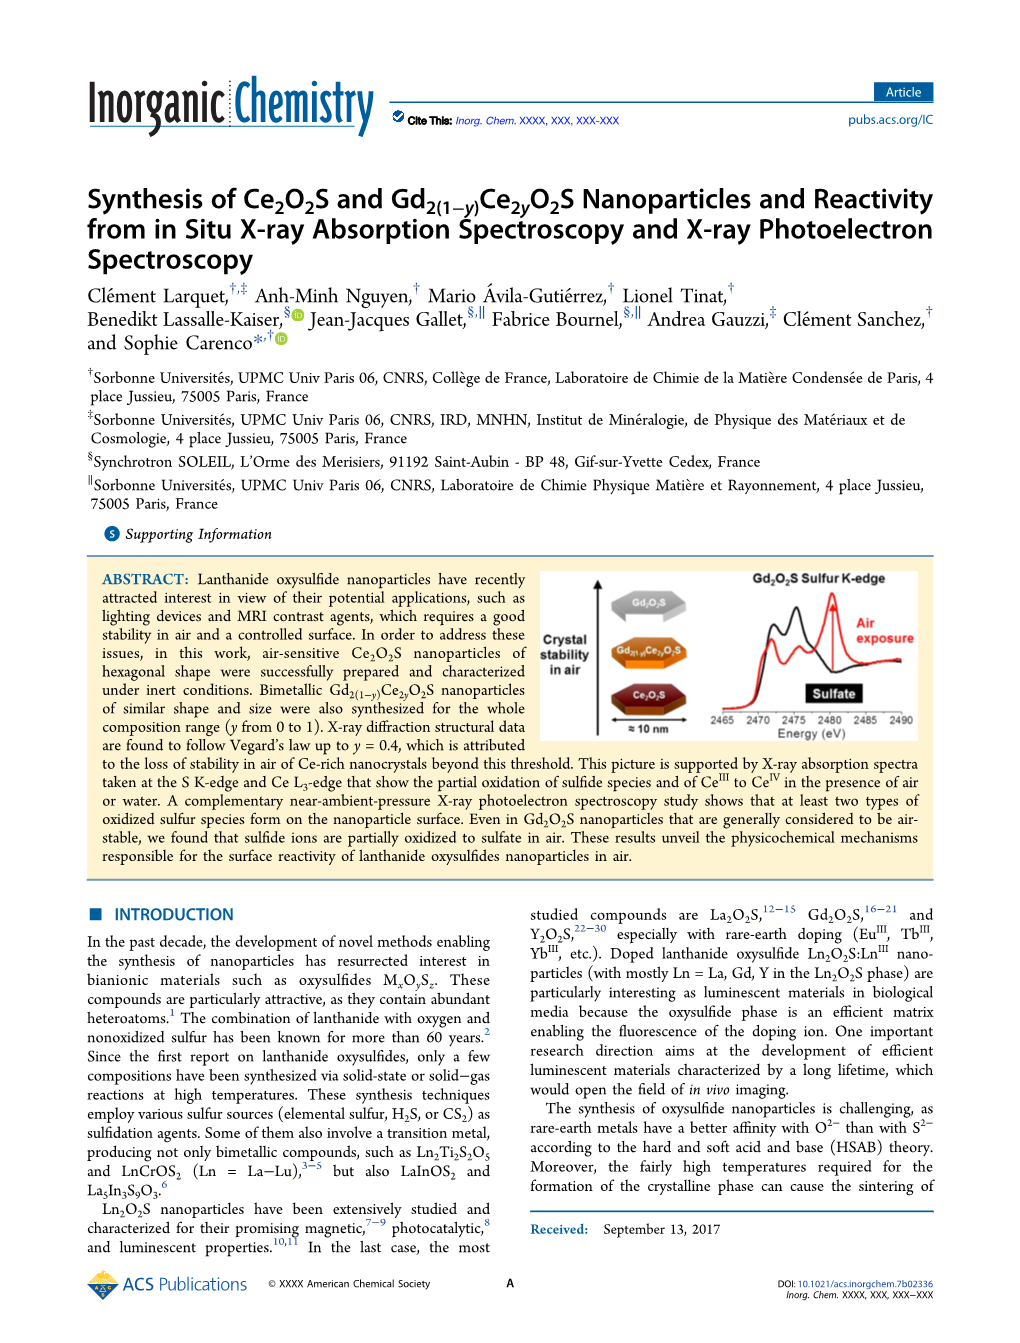 Synthesis of Ce2o2s and Gd2(1–Y)Ce2yo2s Nanoparticles and Reactivity from in Situ X-Ray Absorption Spectroscopy and X-Ray Phot